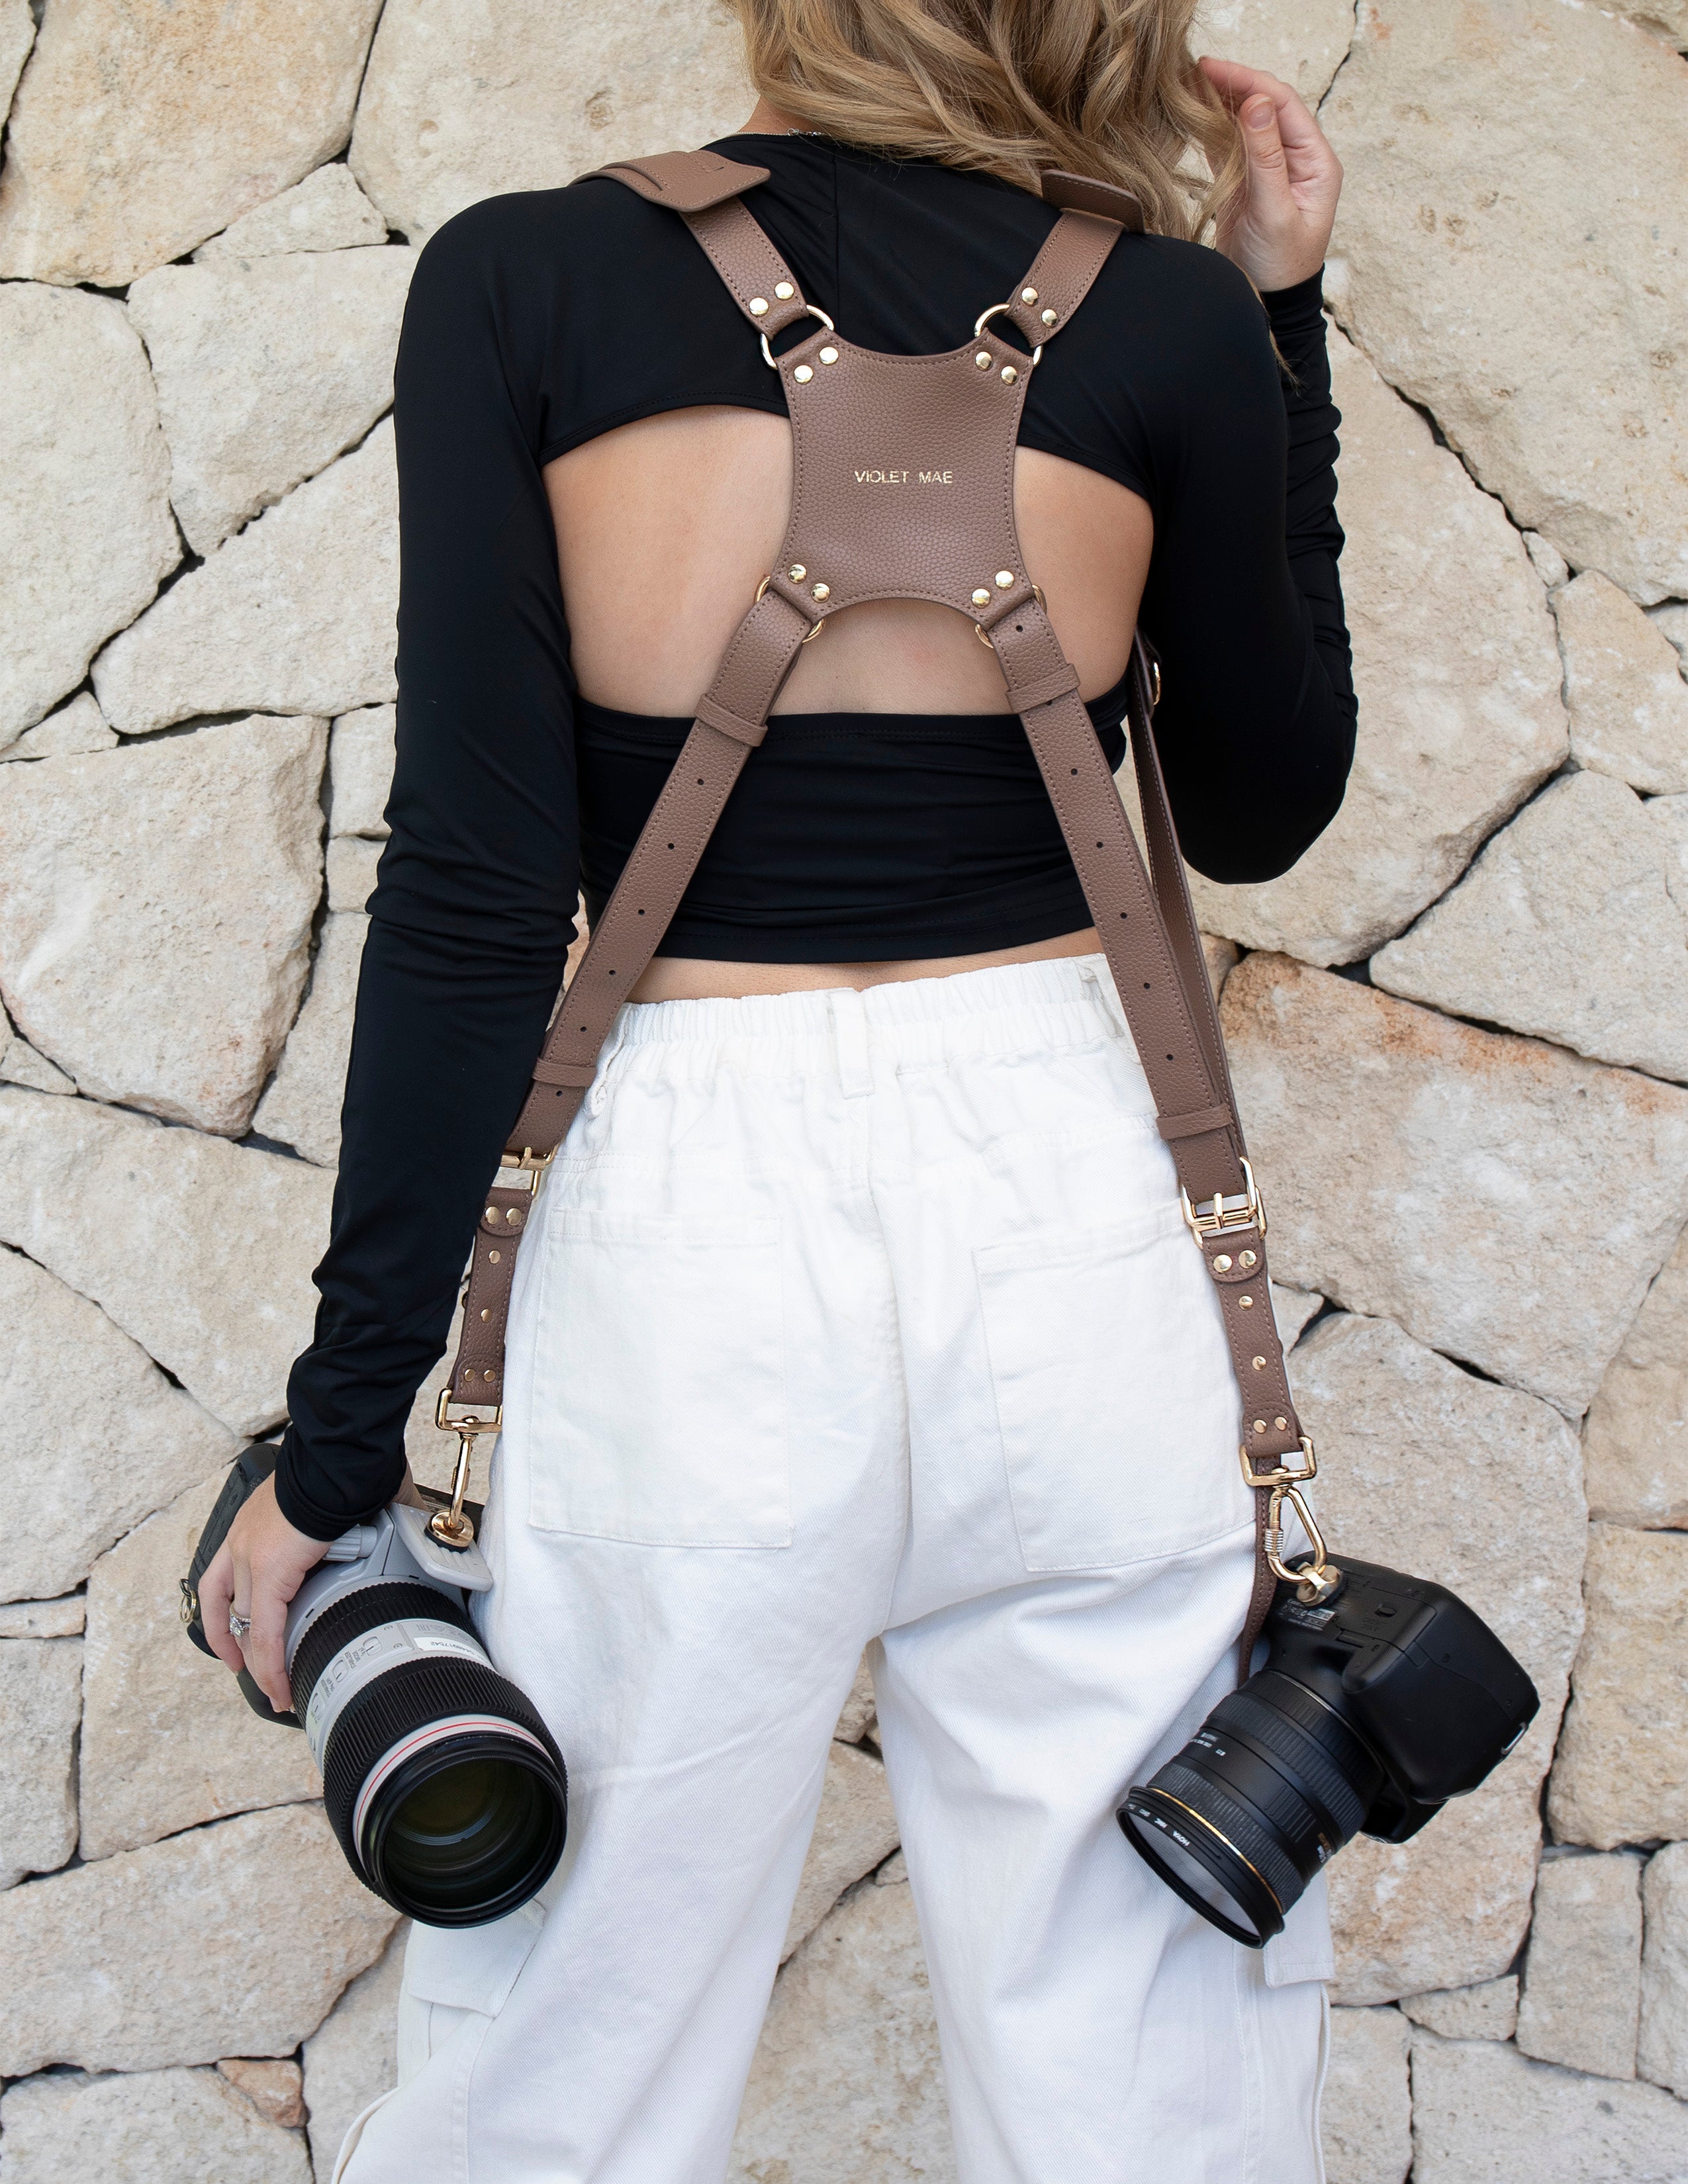 The Hallee Dual Camera Harness